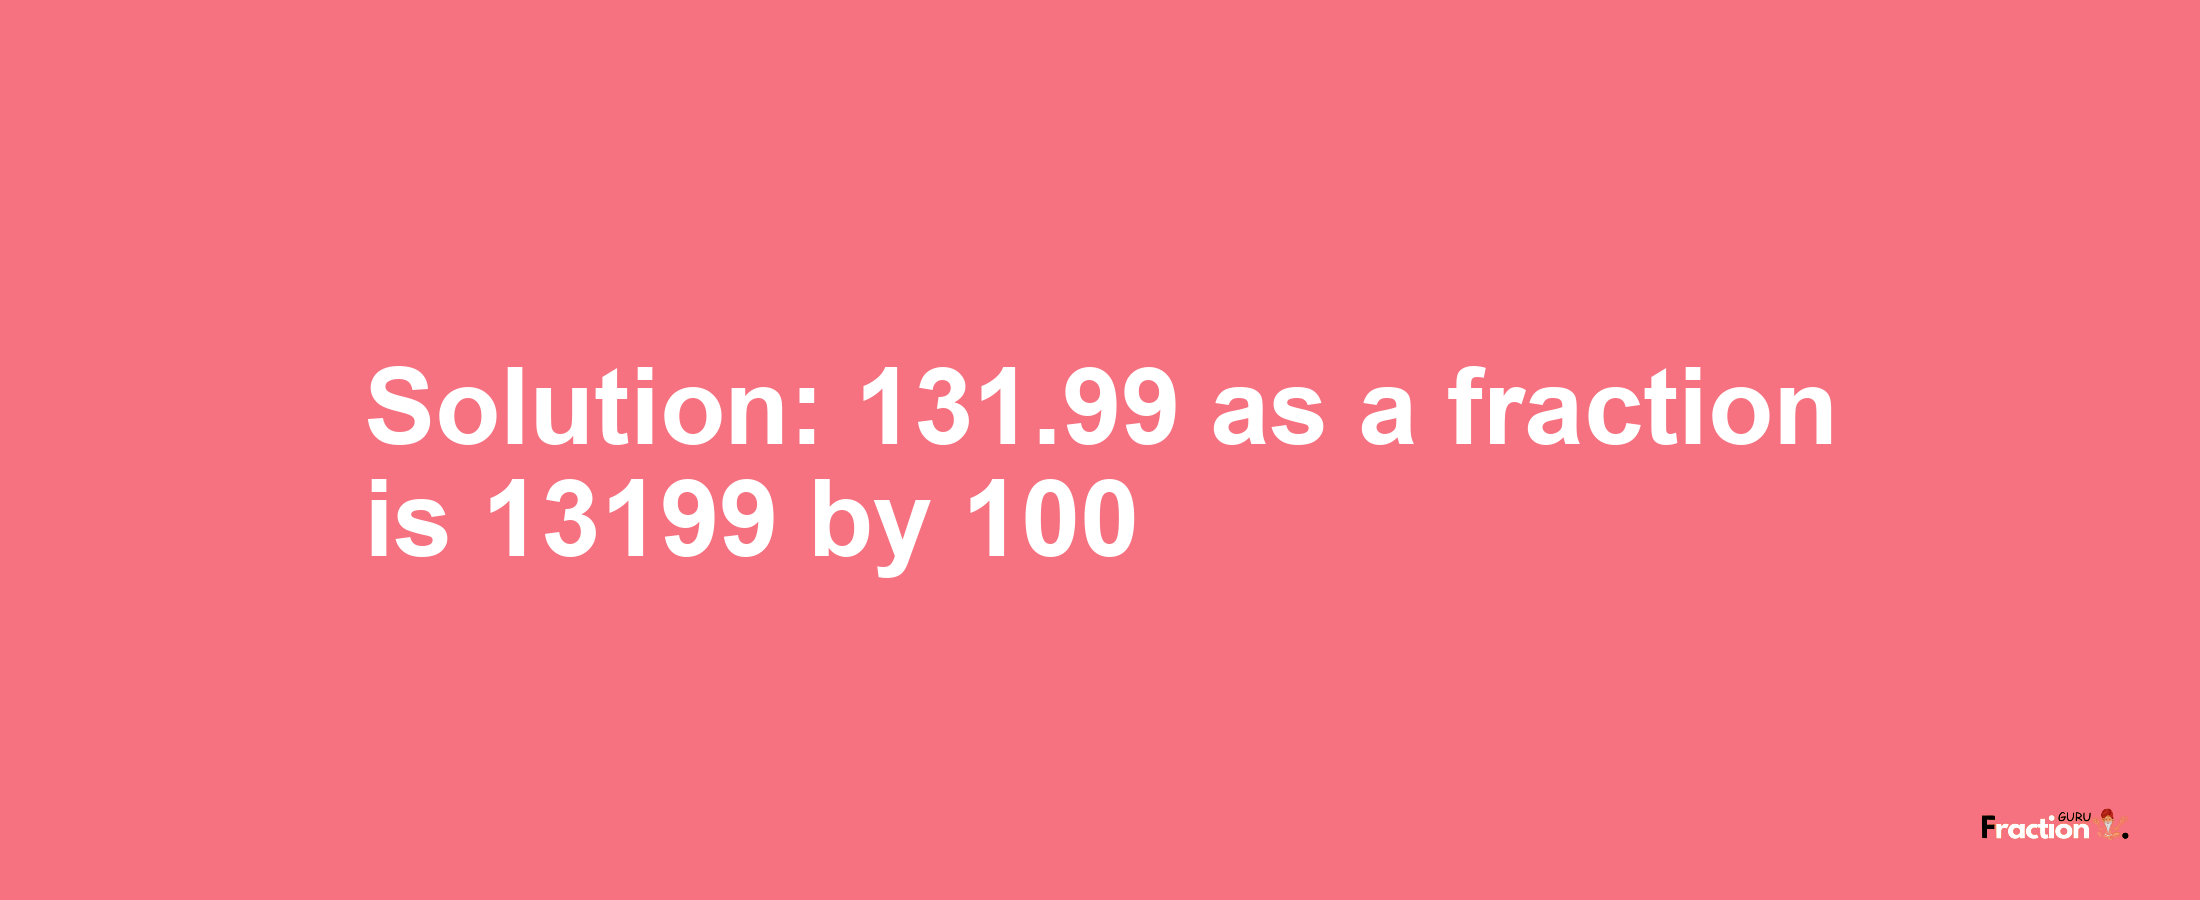 Solution:131.99 as a fraction is 13199/100